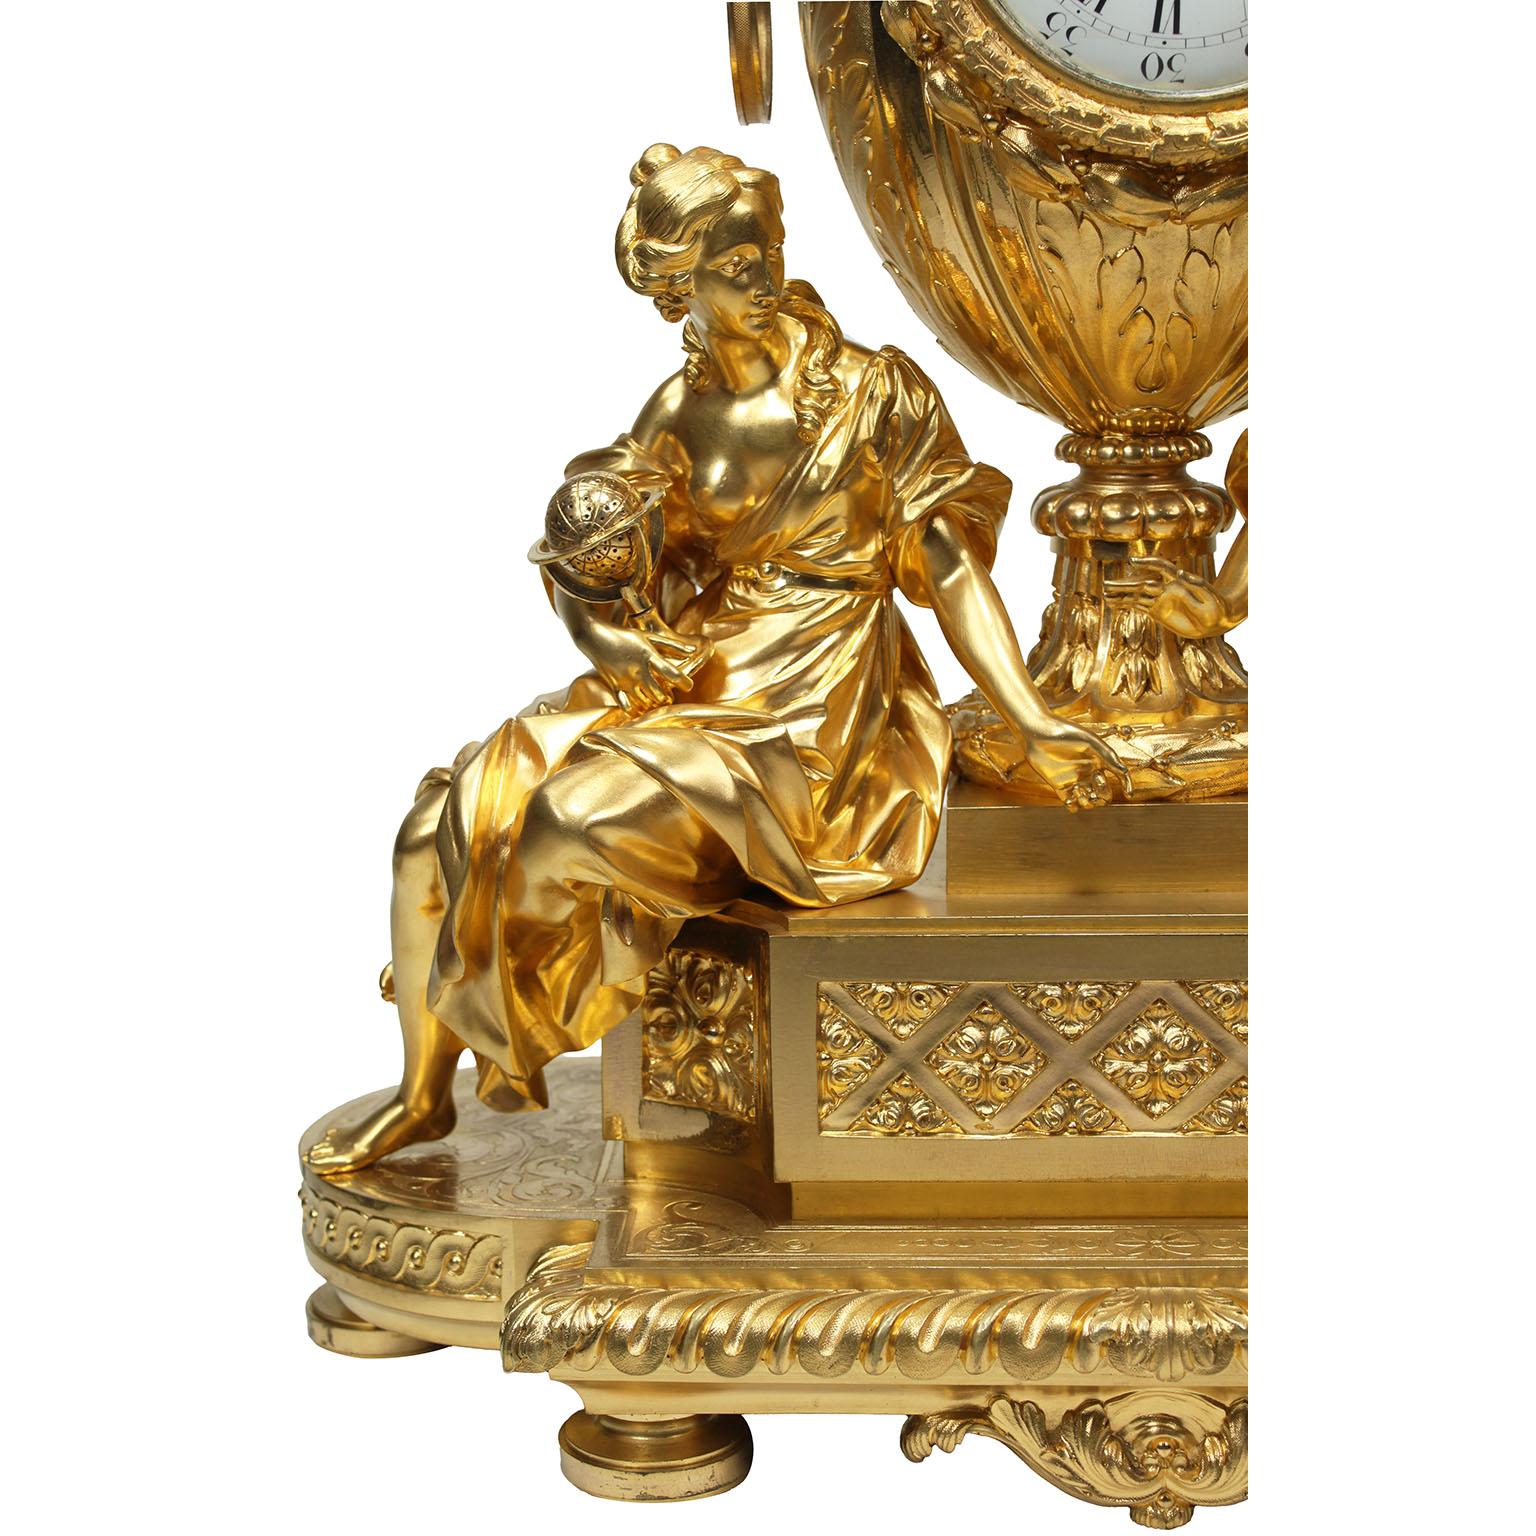 French Louis XVI Style Gilt-Bronze Mantel Clock by Henri Picard & Fedinand Barbedienne For Sale